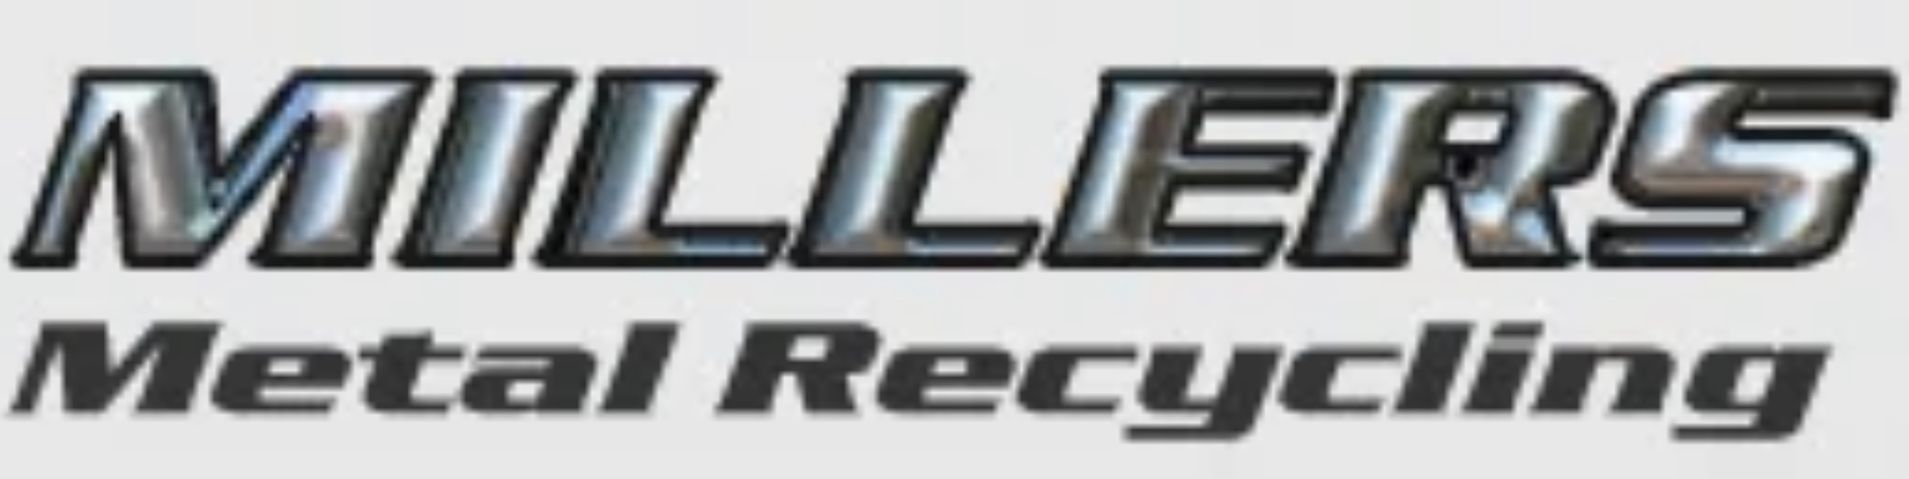 Millers Metal Recycling